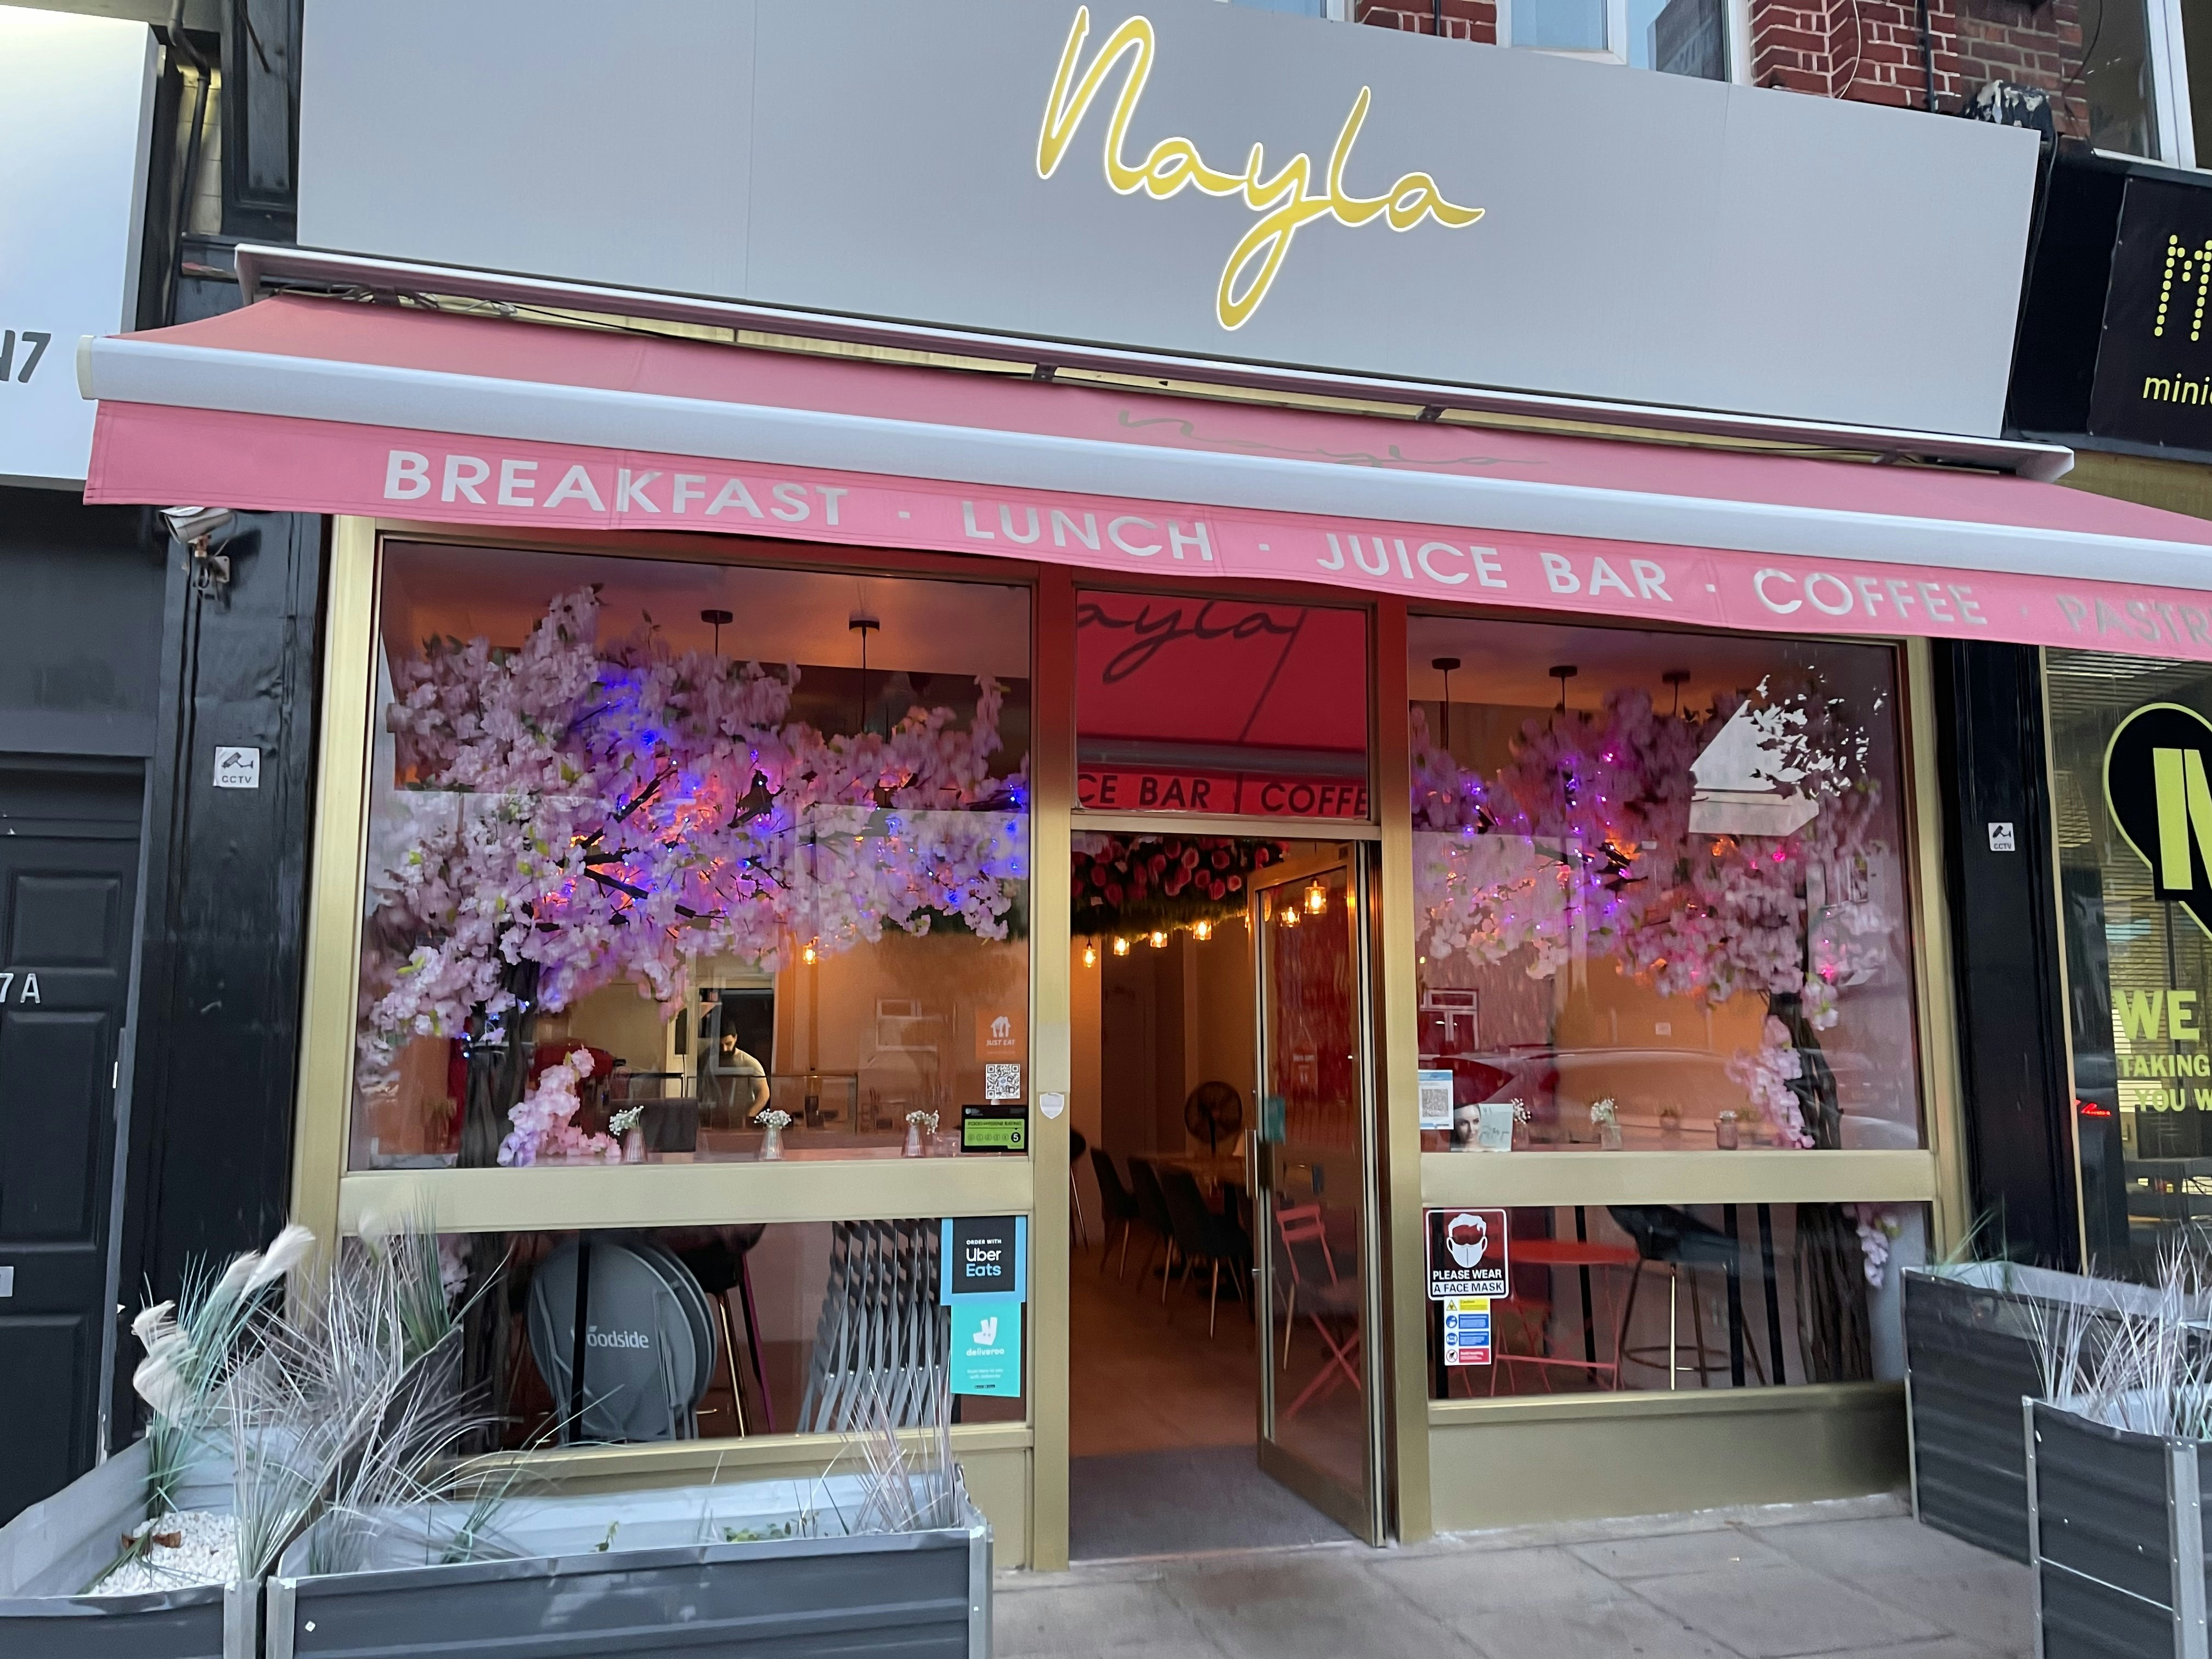 Event Venues in North London - Nayla cafe